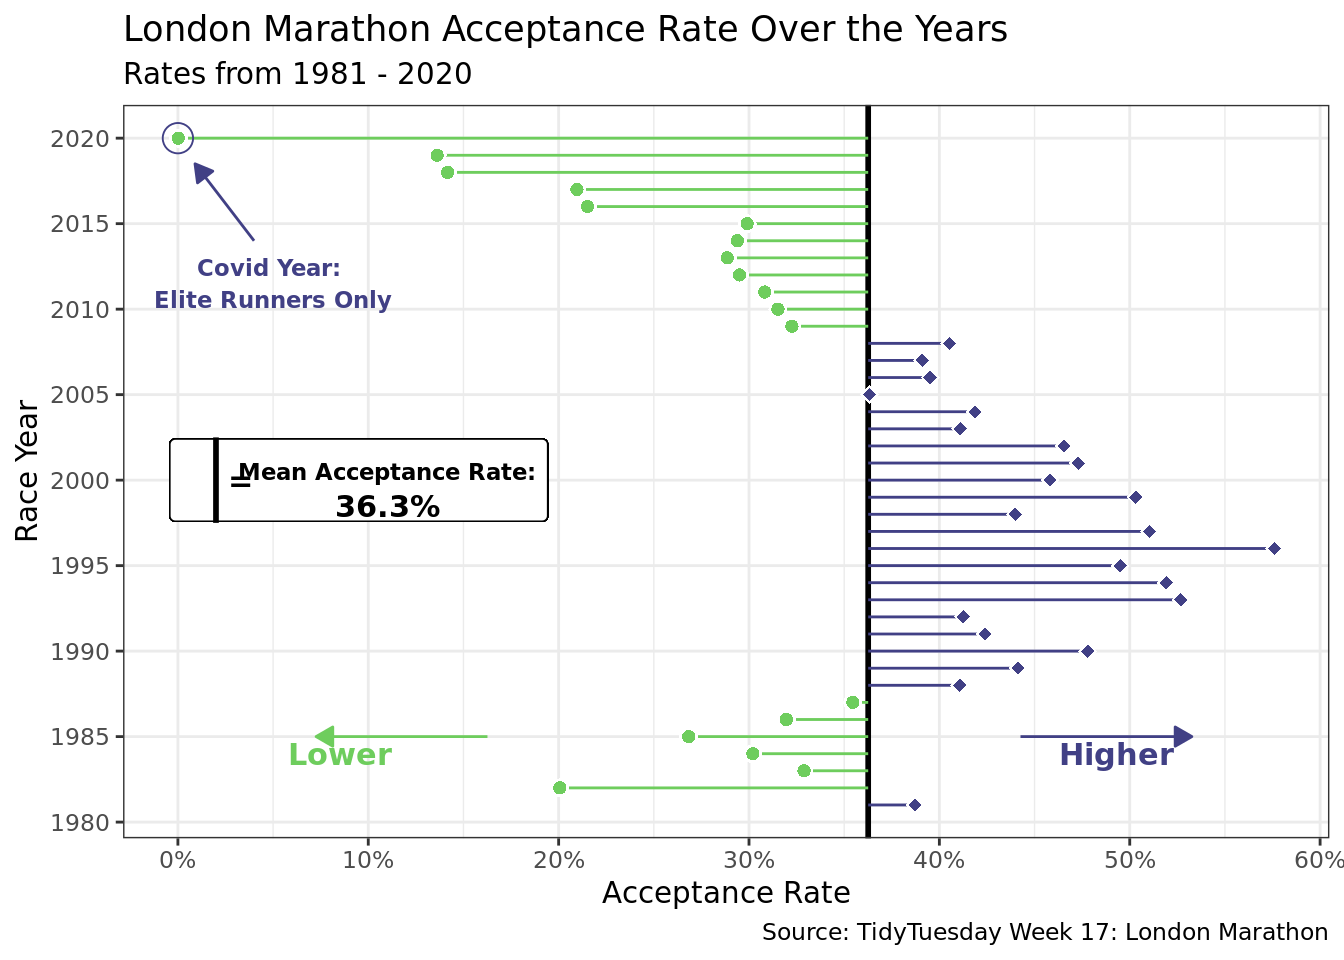 The figure is a scatter plot with line segments titled “London Marathon Acceptance Rate Over the Years” with a subtitle “Rates from 1981-2020”. Each point is connected to a line at 36.3%, the mean acceptance rate from 1981-2020. The acceptance rate was above the mean in 1981 and from 1988 to 2008 and was below the mean acceptance rate for all other years. 2020 is labeled as an outlier with an almost 0% acceptance rate, with an annotation indicating this was due to COVID where only elite runners were permitted to compete.